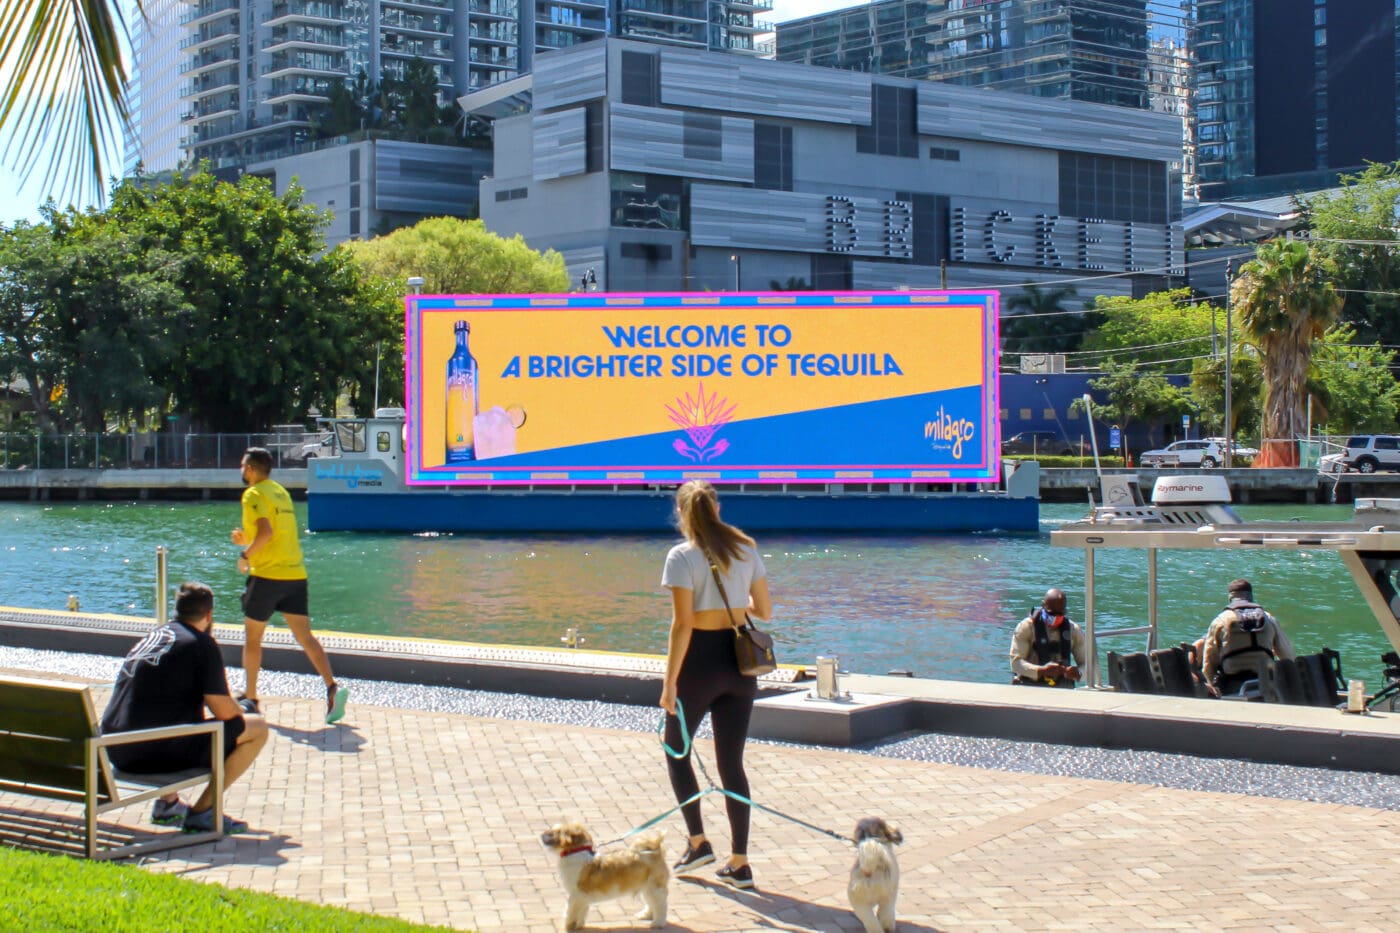 outdoor advertising in Brickell Miami and the Miami River with Milagro Tequila.